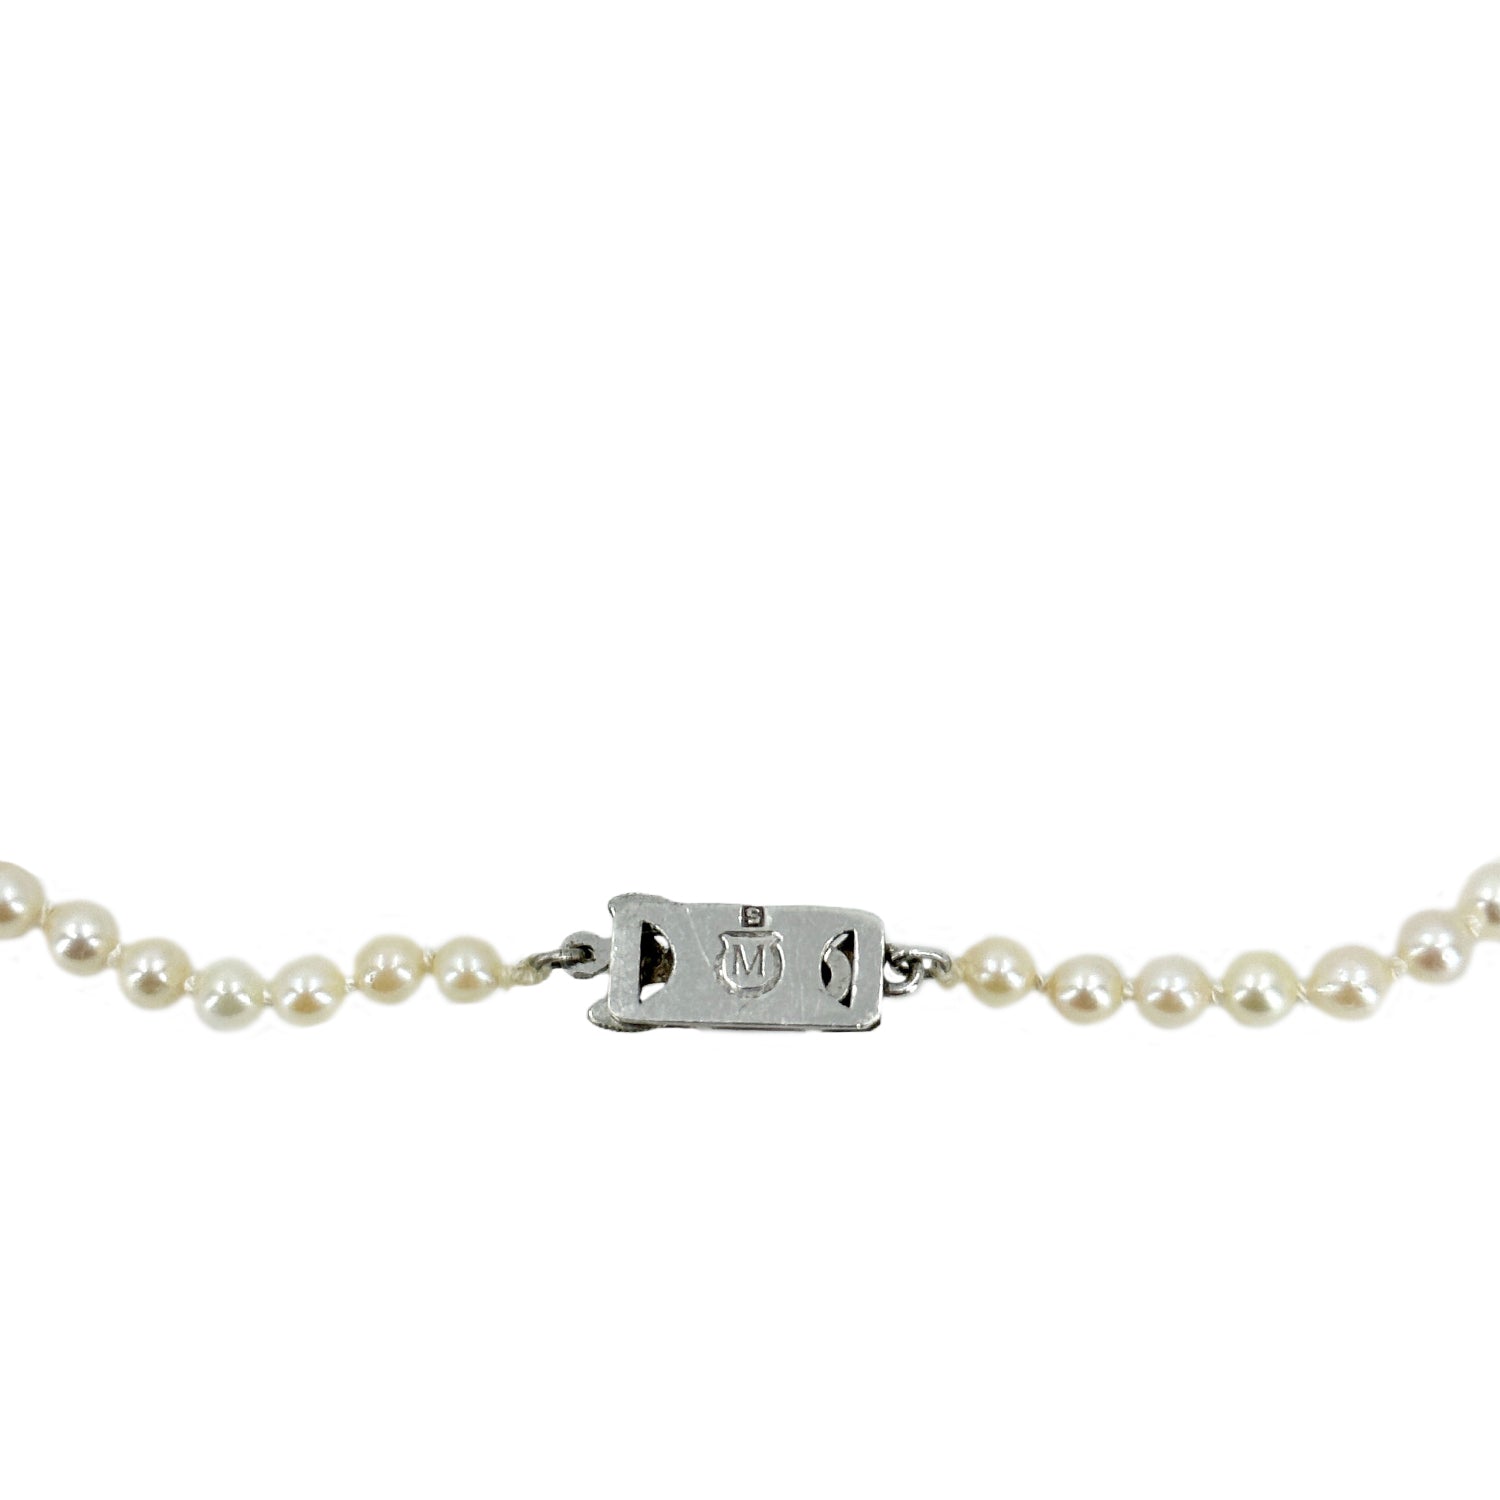 Vintage Mikimoto Graduated Japanese Cultured Akoya Pearl Strand - Sterling Silver 20.50 Inch